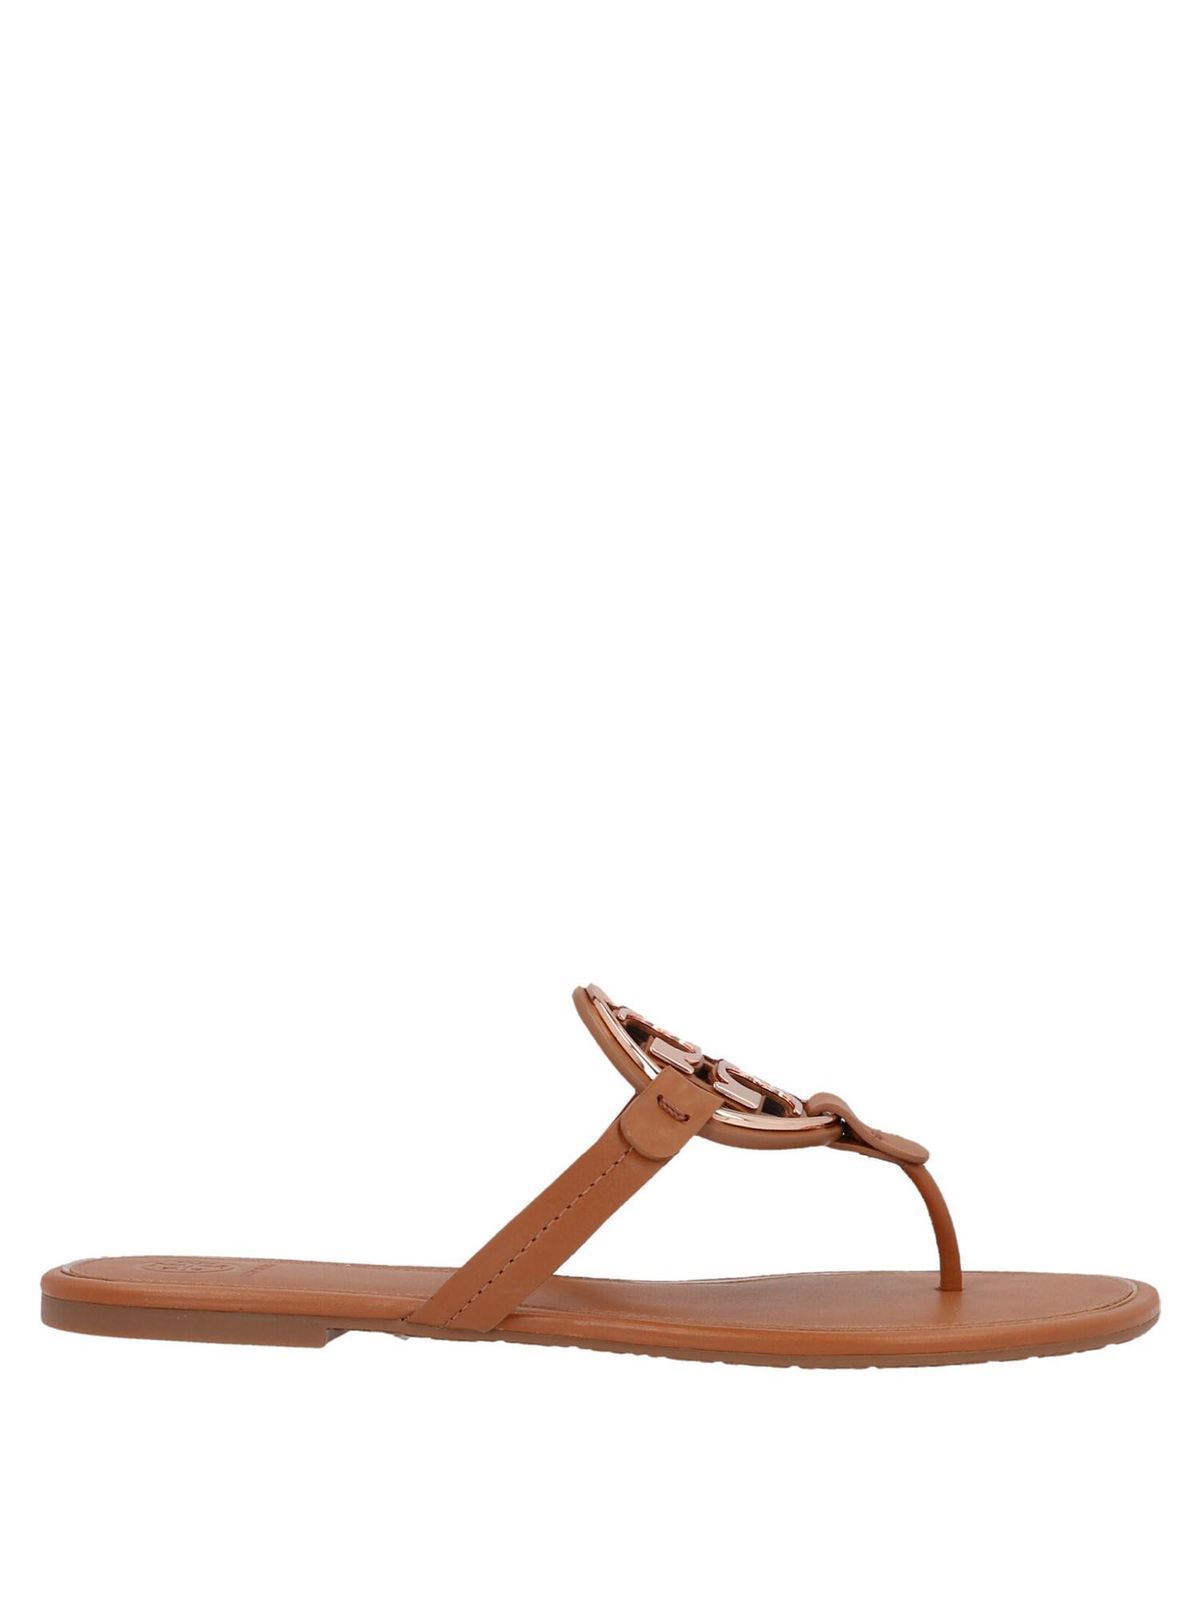 Sandals Tory Burch - Miller sandals in tan color - 47617105 